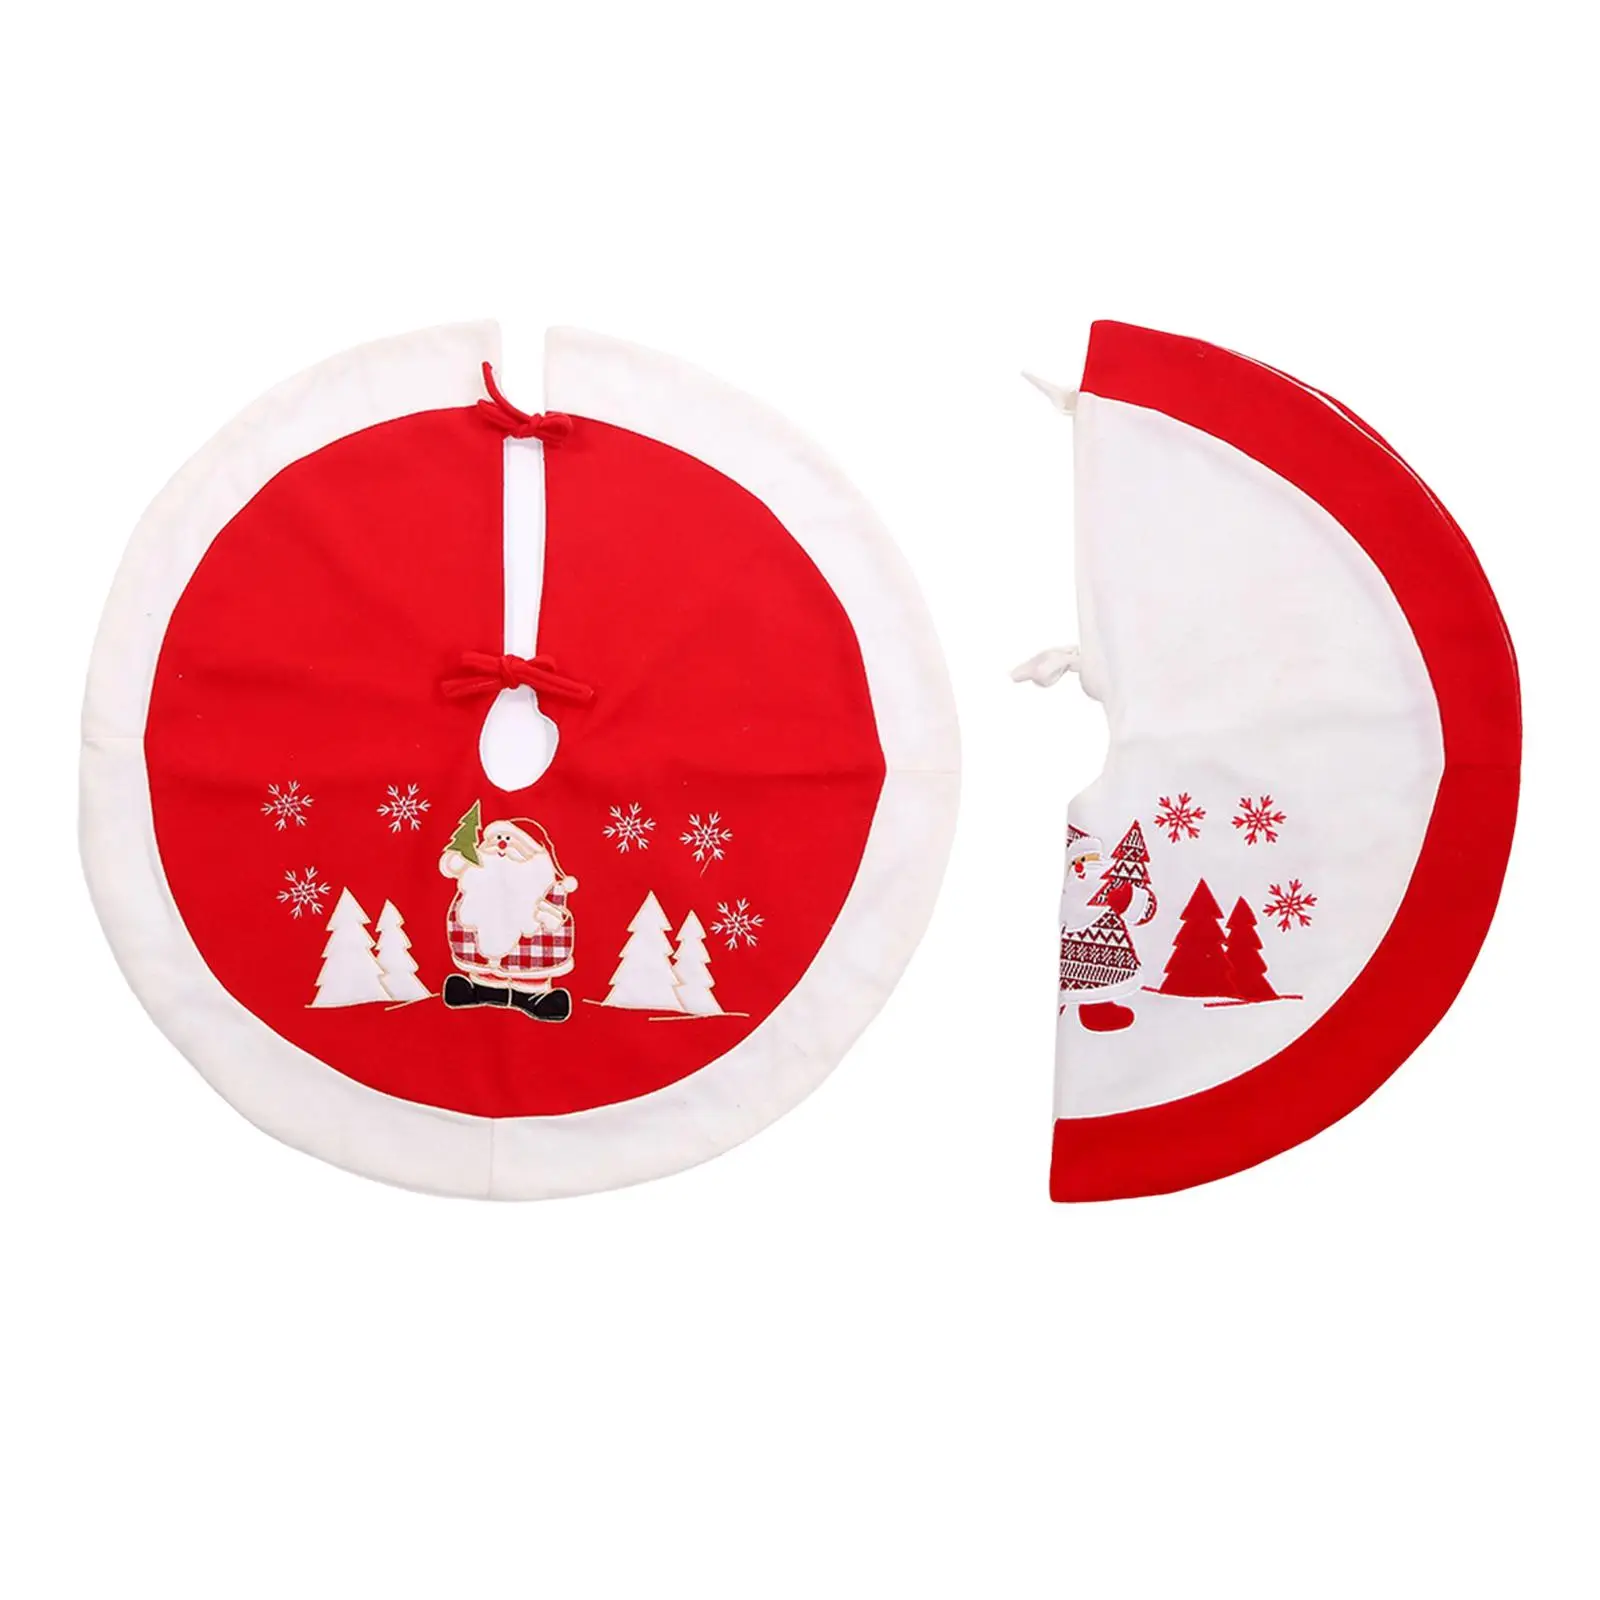 90cm Christmas Tree Skirt with Rope Vintage with Santa Claus Pattern Xmas Tree Base Cover for School outdoor Office Home